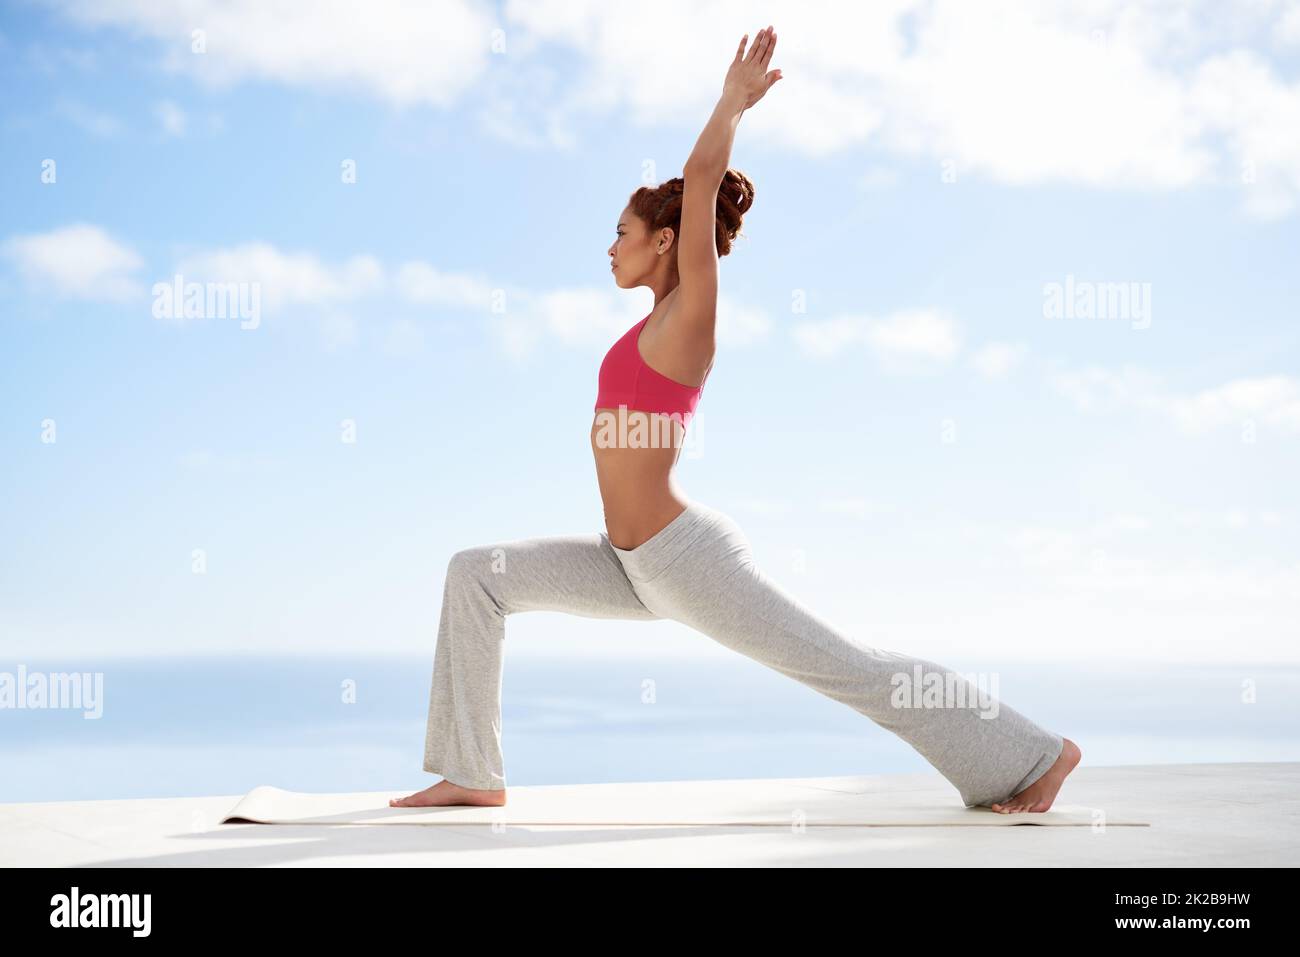 Balanced mind and body. Shot of a young woman practicing yoga outside on a sunny day. Stock Photo